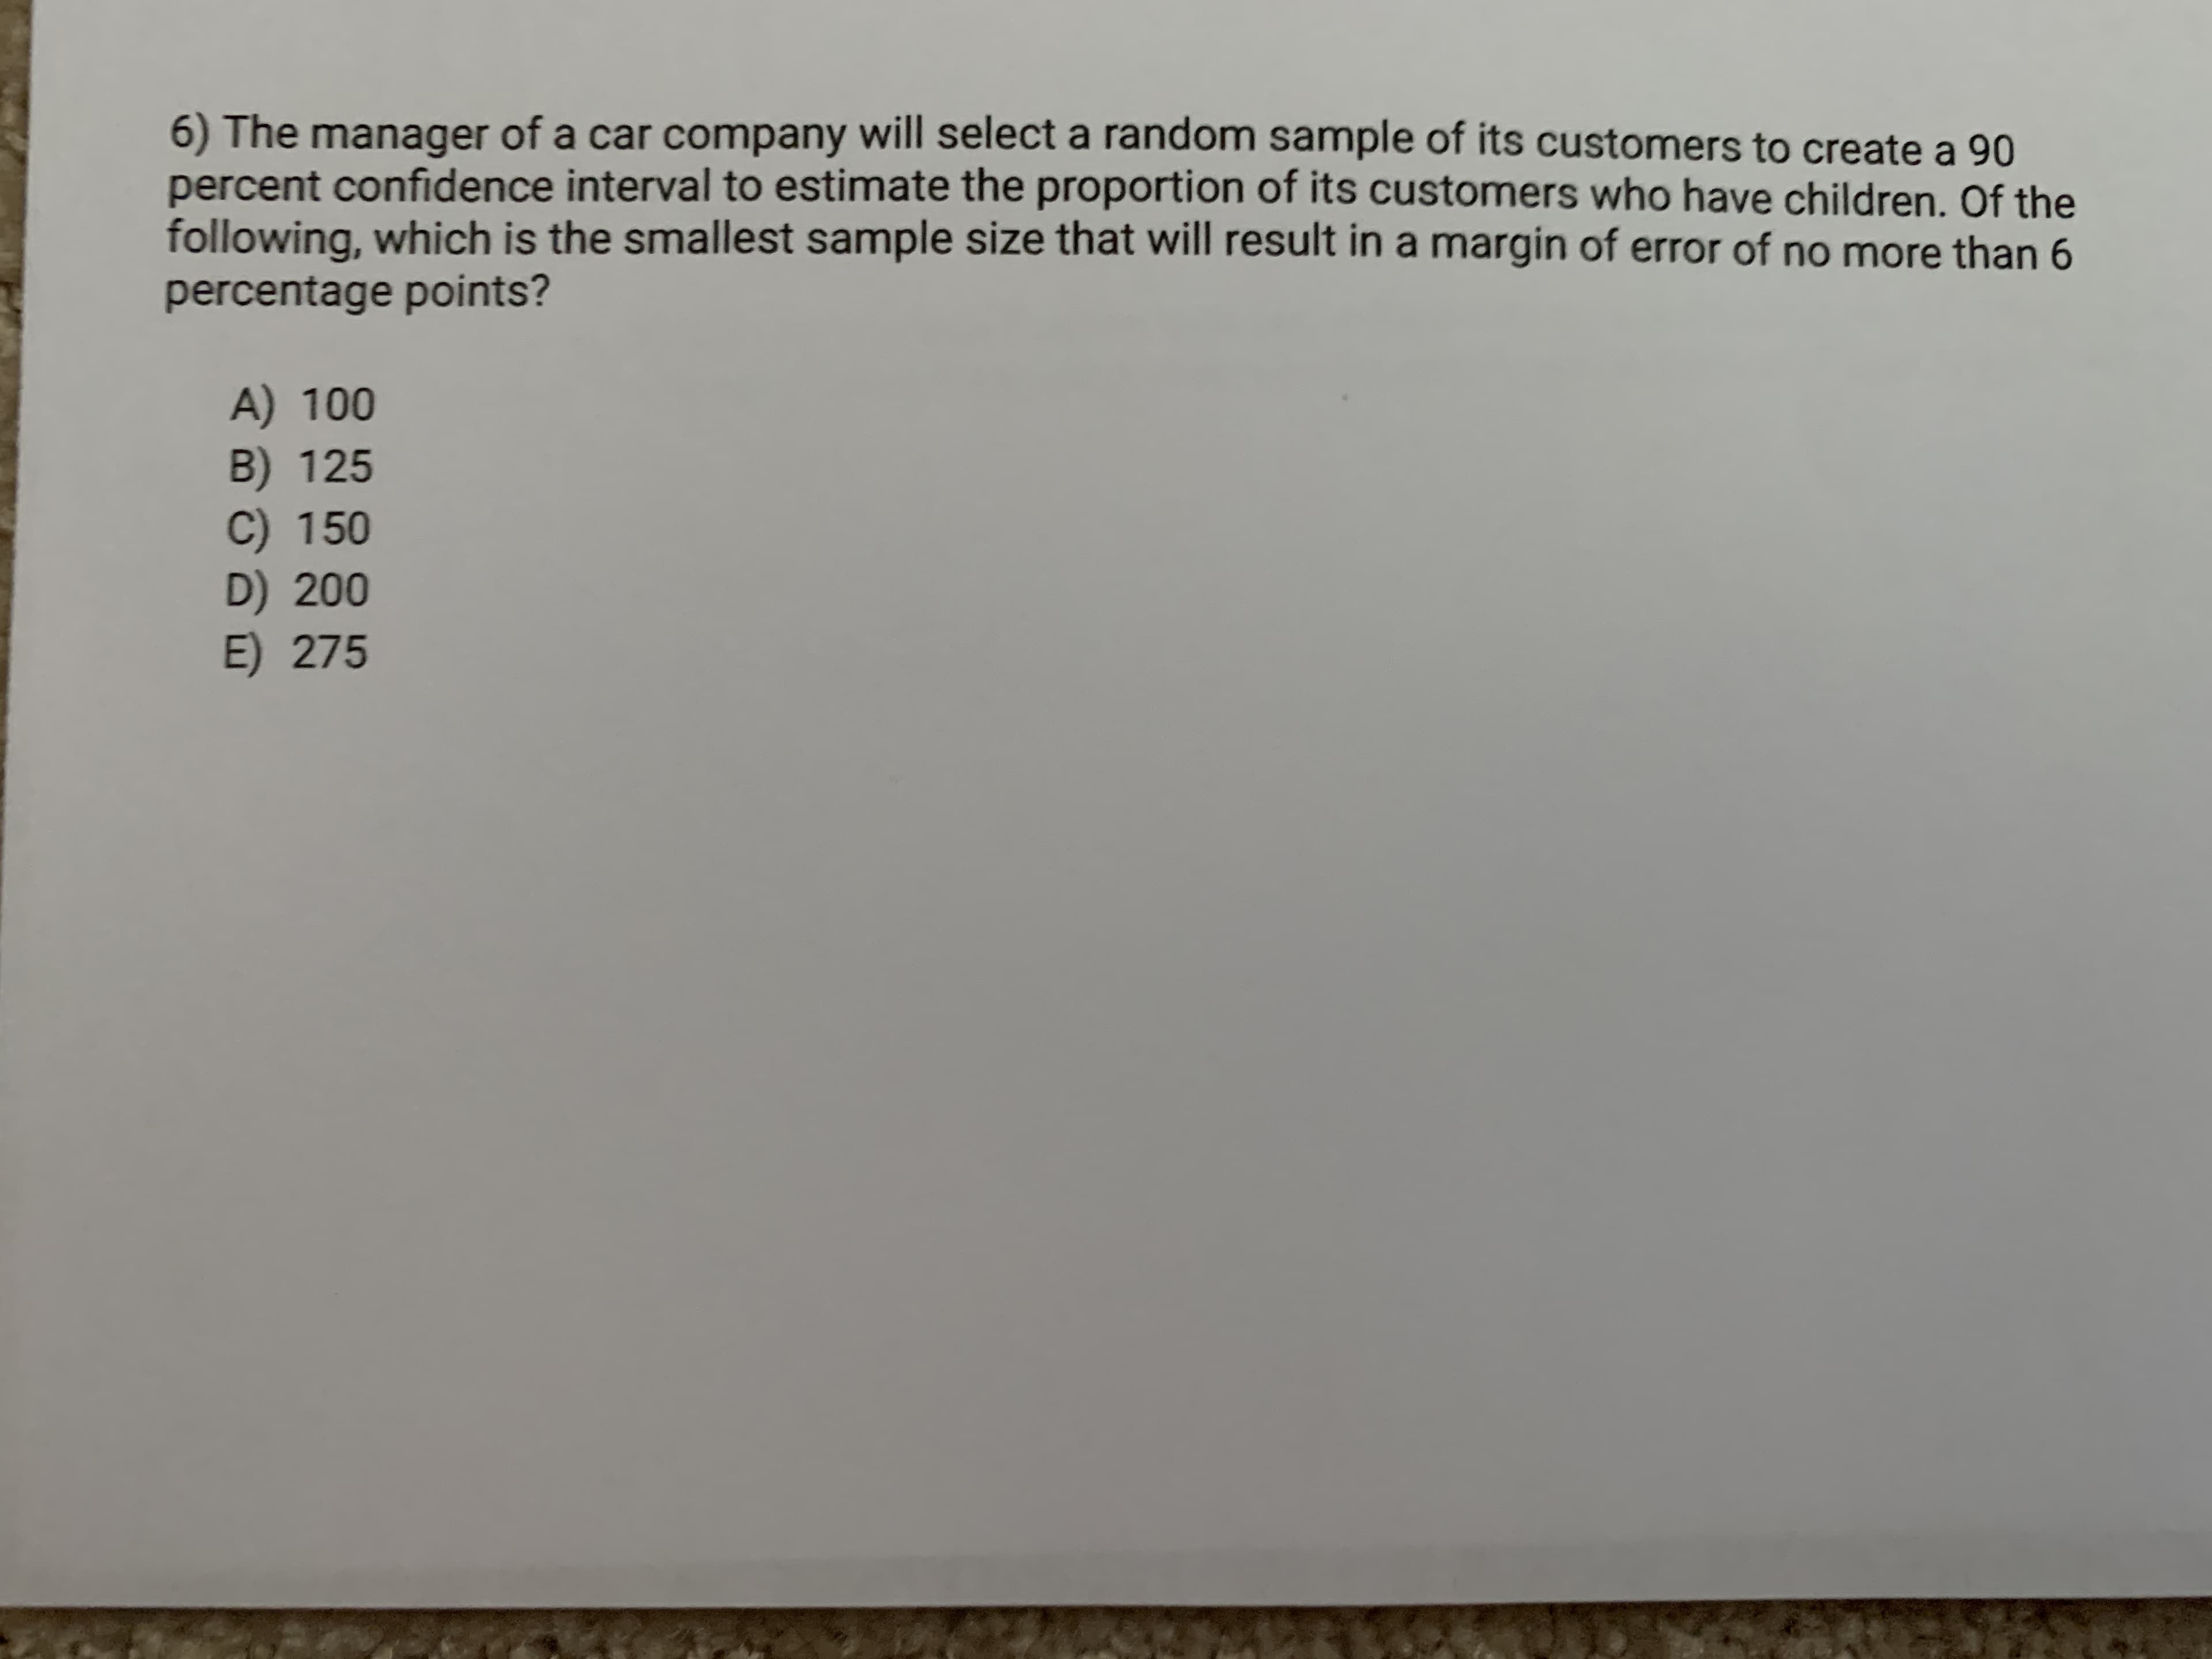 6) The manager of a car company will select a random sample of its customers to create a 90
percent confidence interval to estimate the proportion of its customers who have children. Of the
following, which is the smallest sample size that will result in a margin of error of no more than 6
percentage points?
A) 100
B) 125
C) 150
D) 200
E) 275
